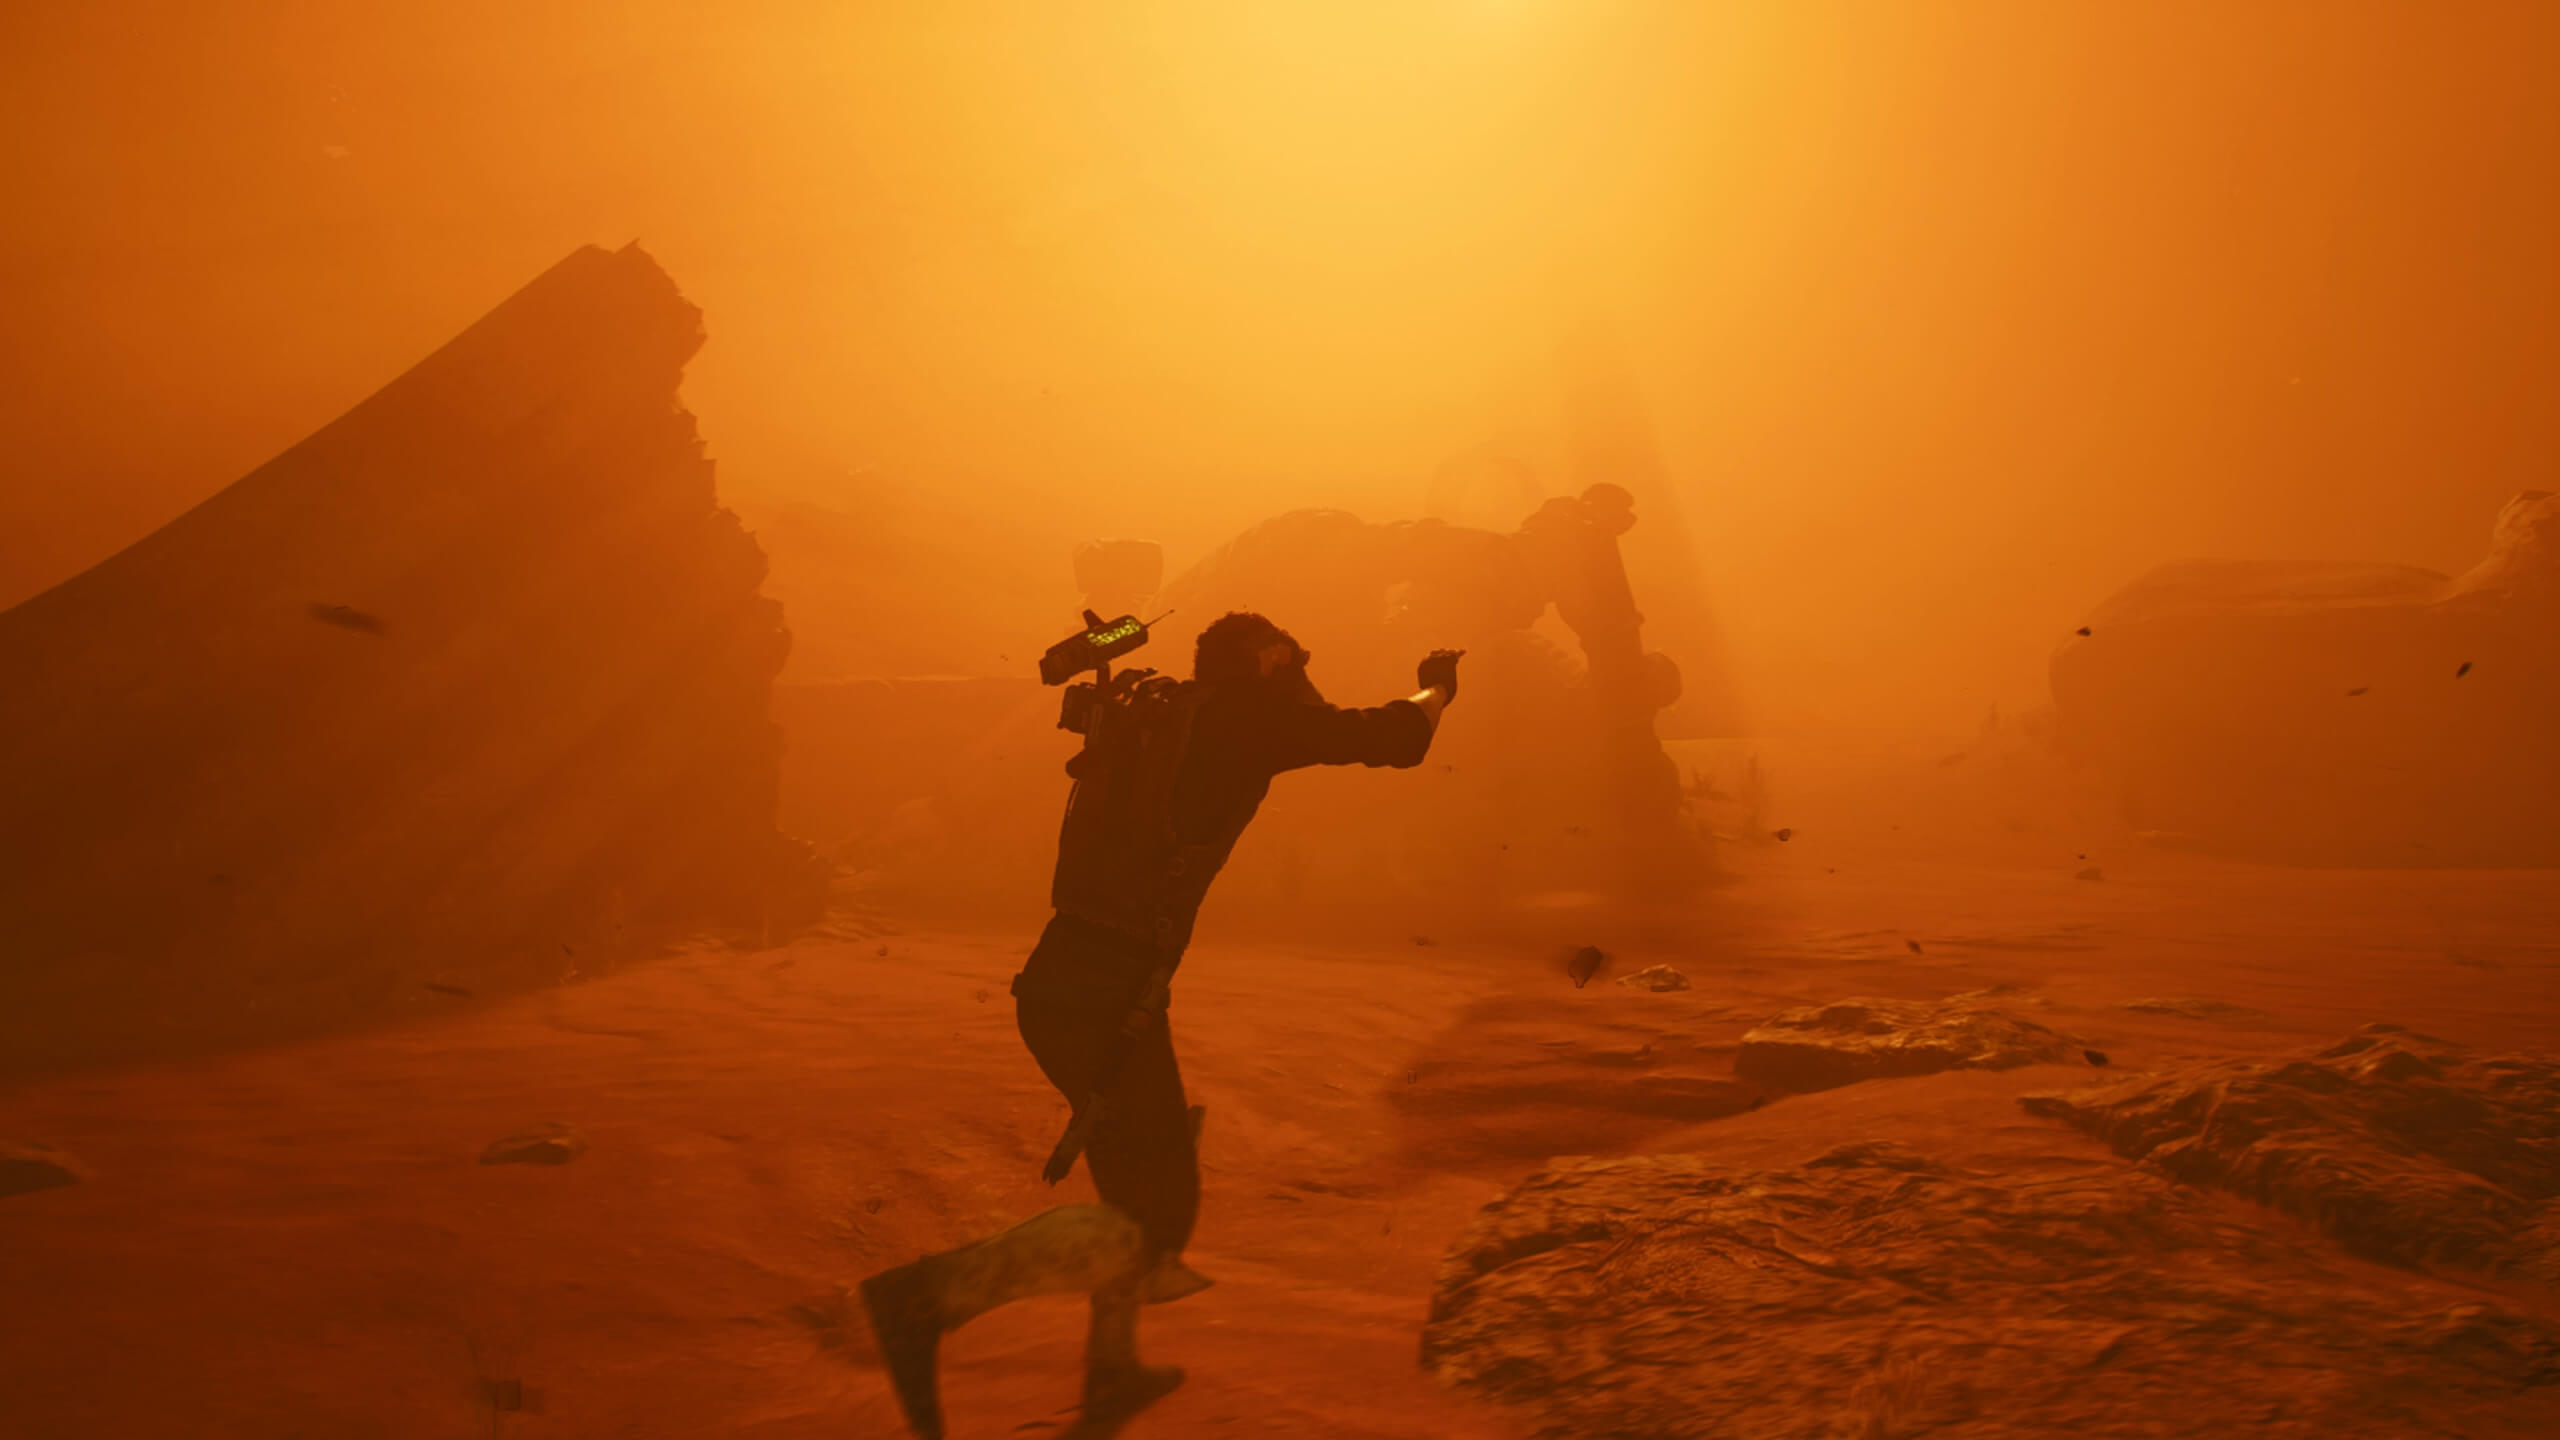 Cal has been caught in a sandstorm, the shot is both dark yet vibrant at the same time this is a treat for the eyes.